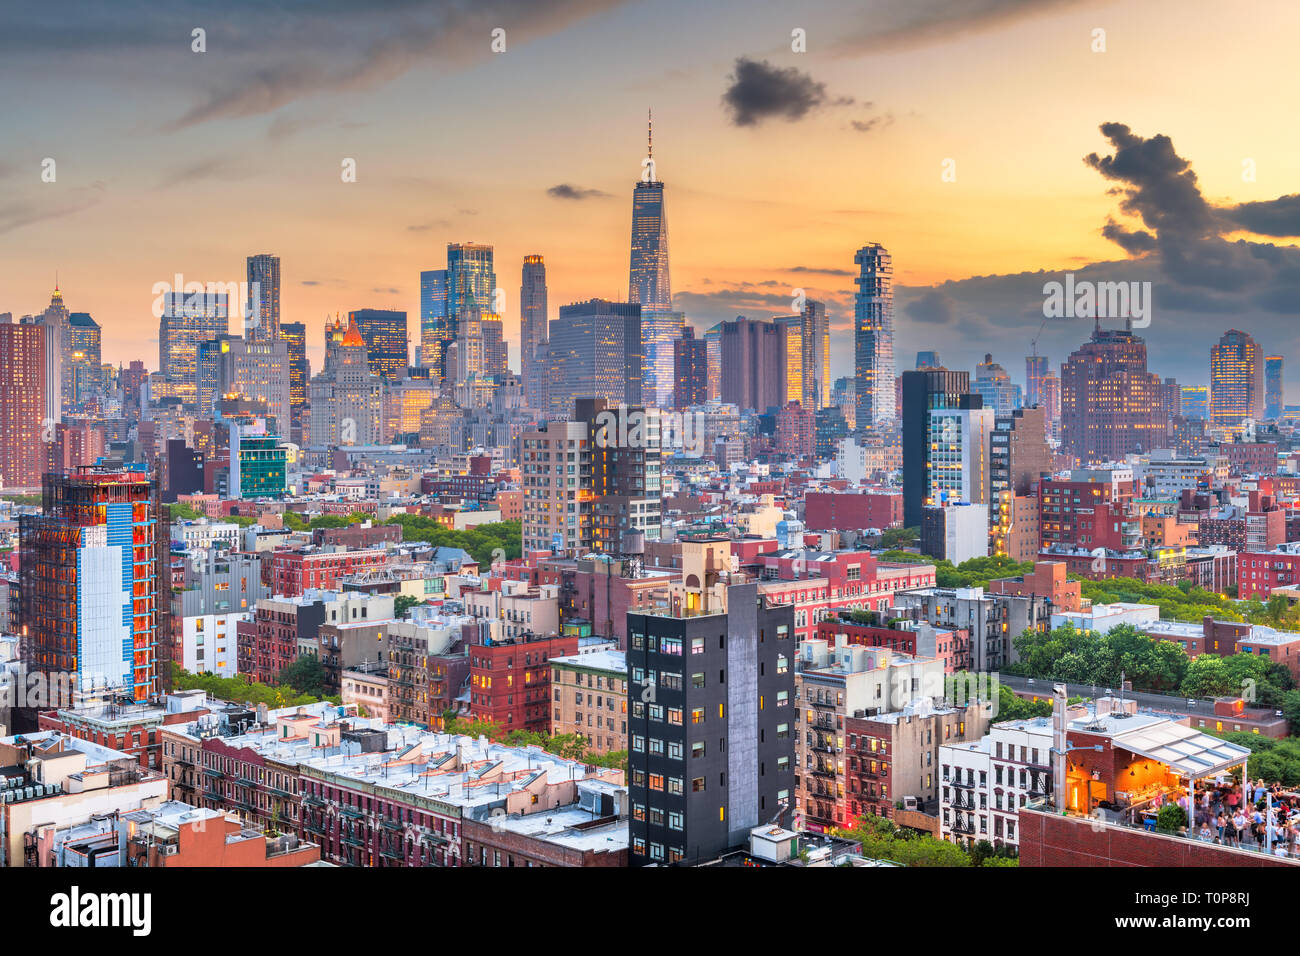 New York, New York, USA downtown city skyline over the Lower East Side at dusk. Stock Photo